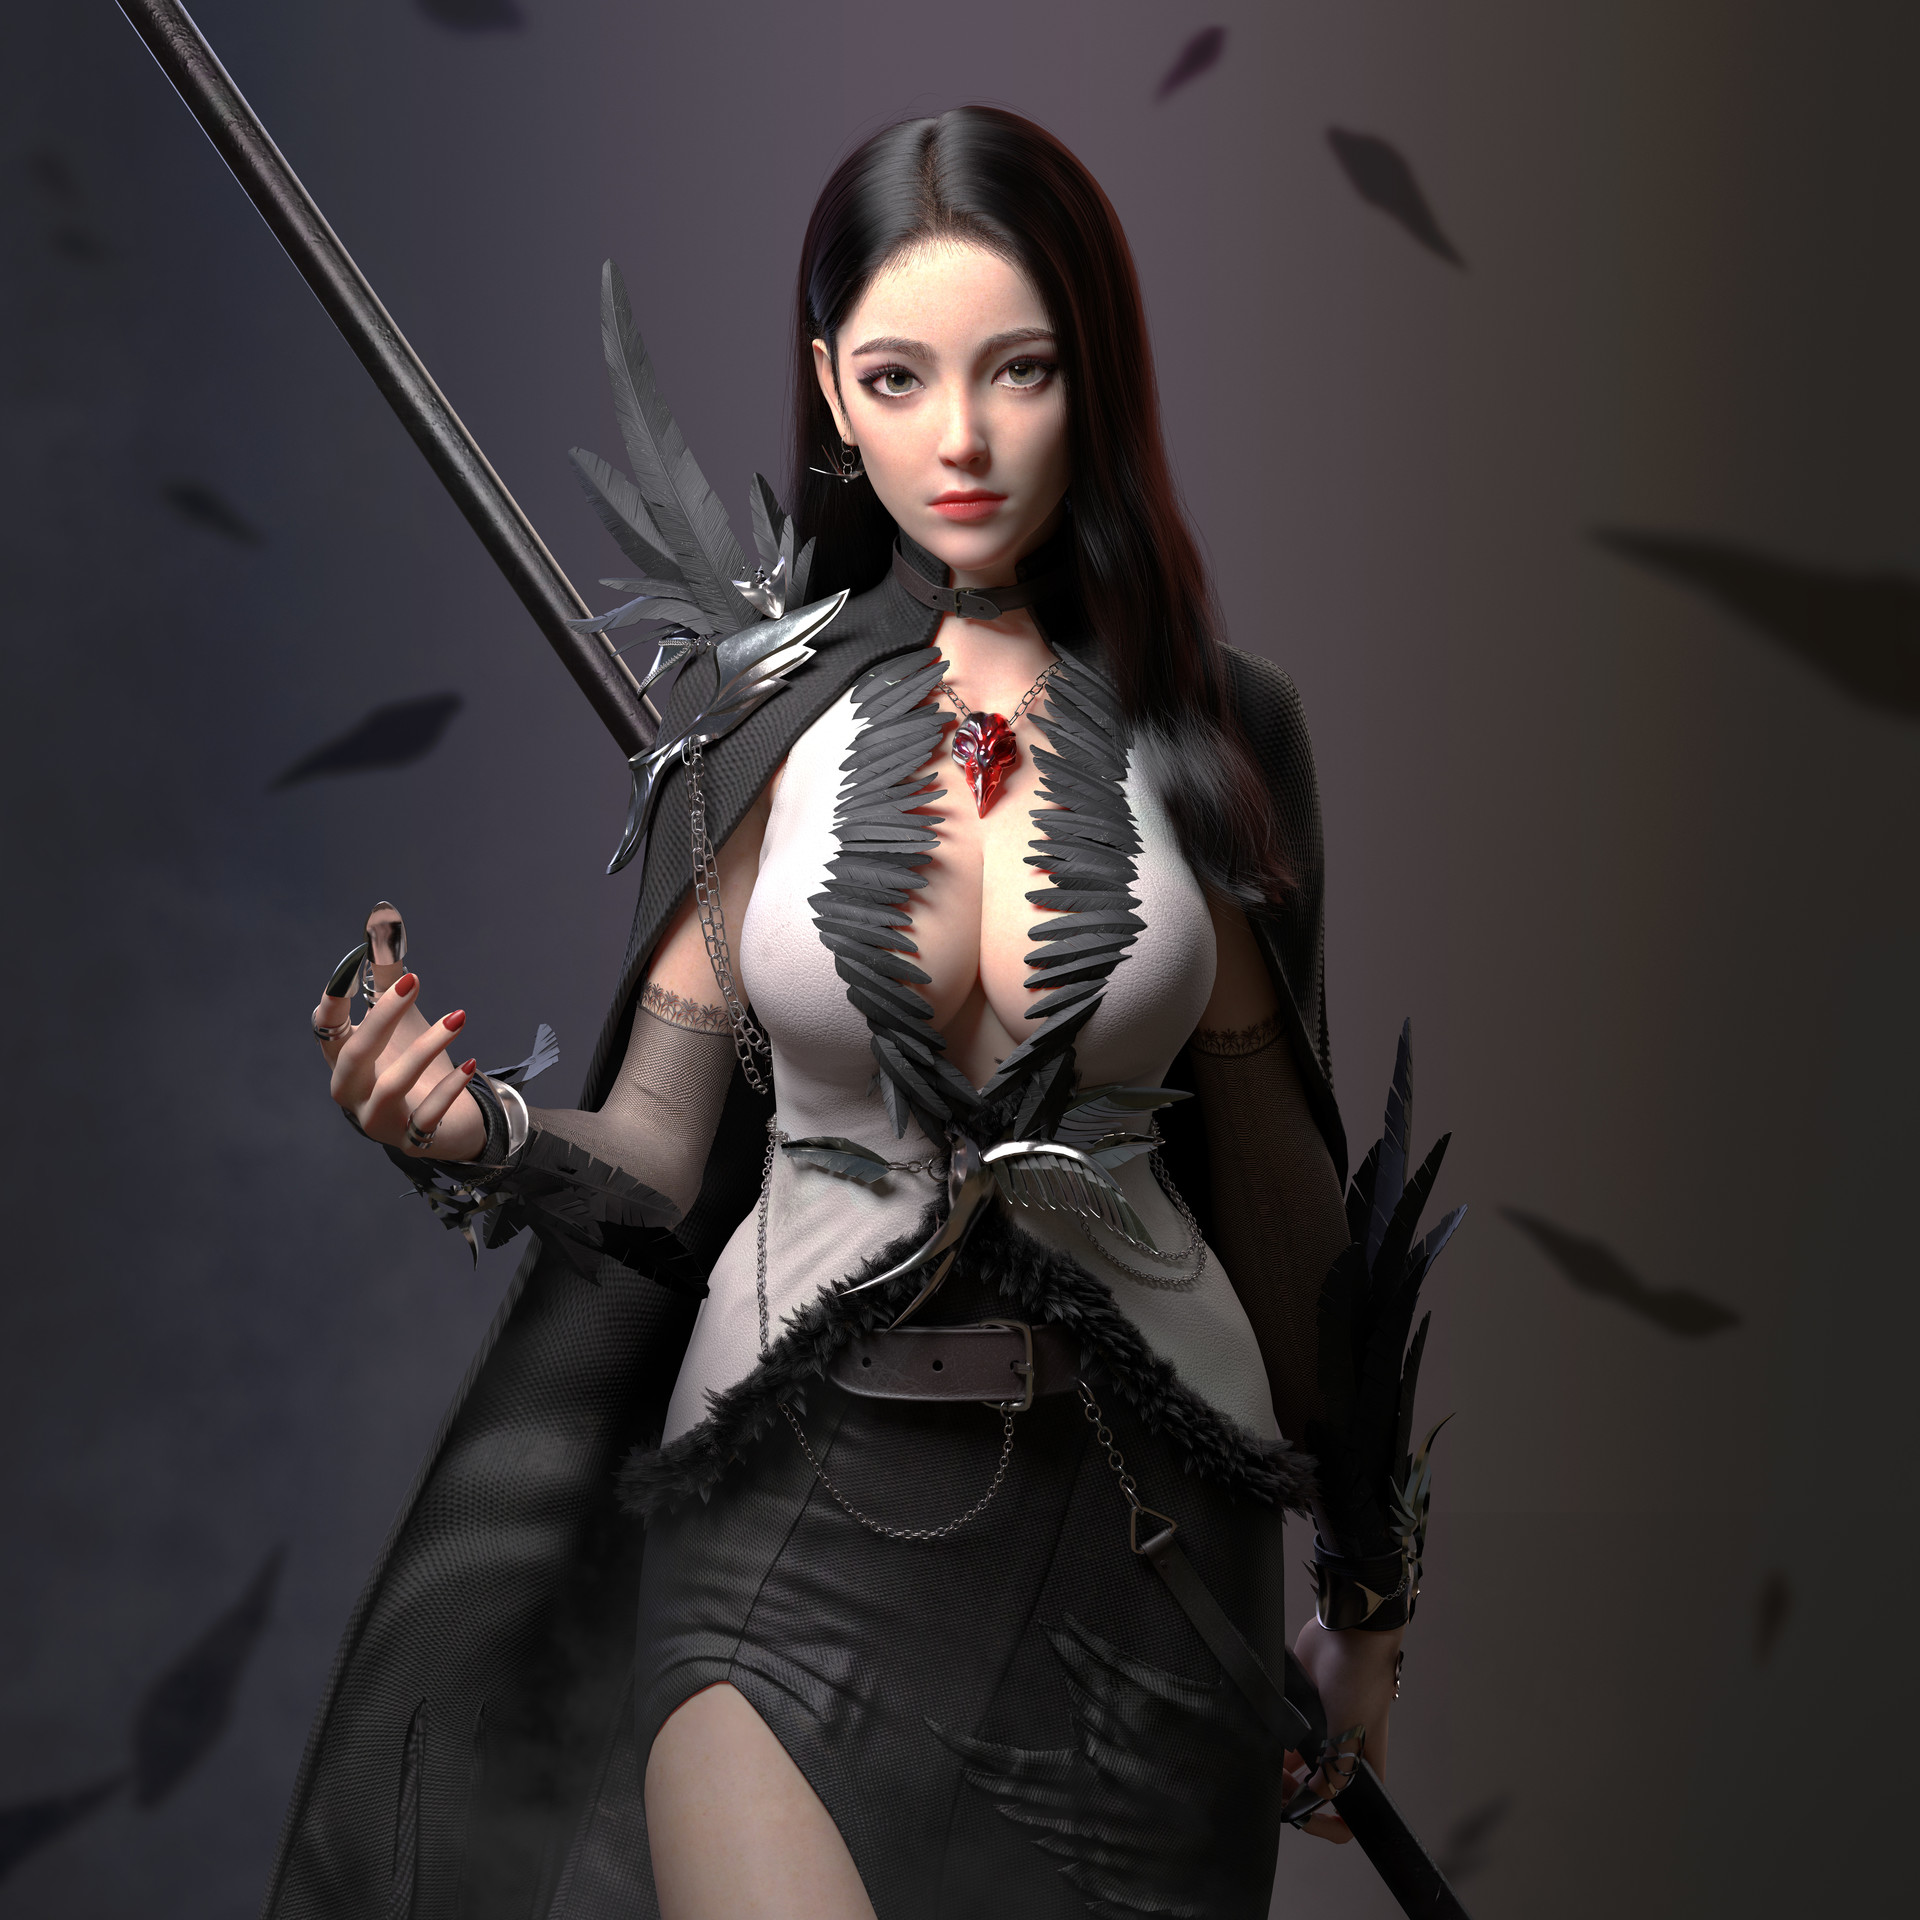 Cifangyi Women Dark Hair Dress Black Clothing Painted Nails Necklace Weapon Feathers Render 1920x1920